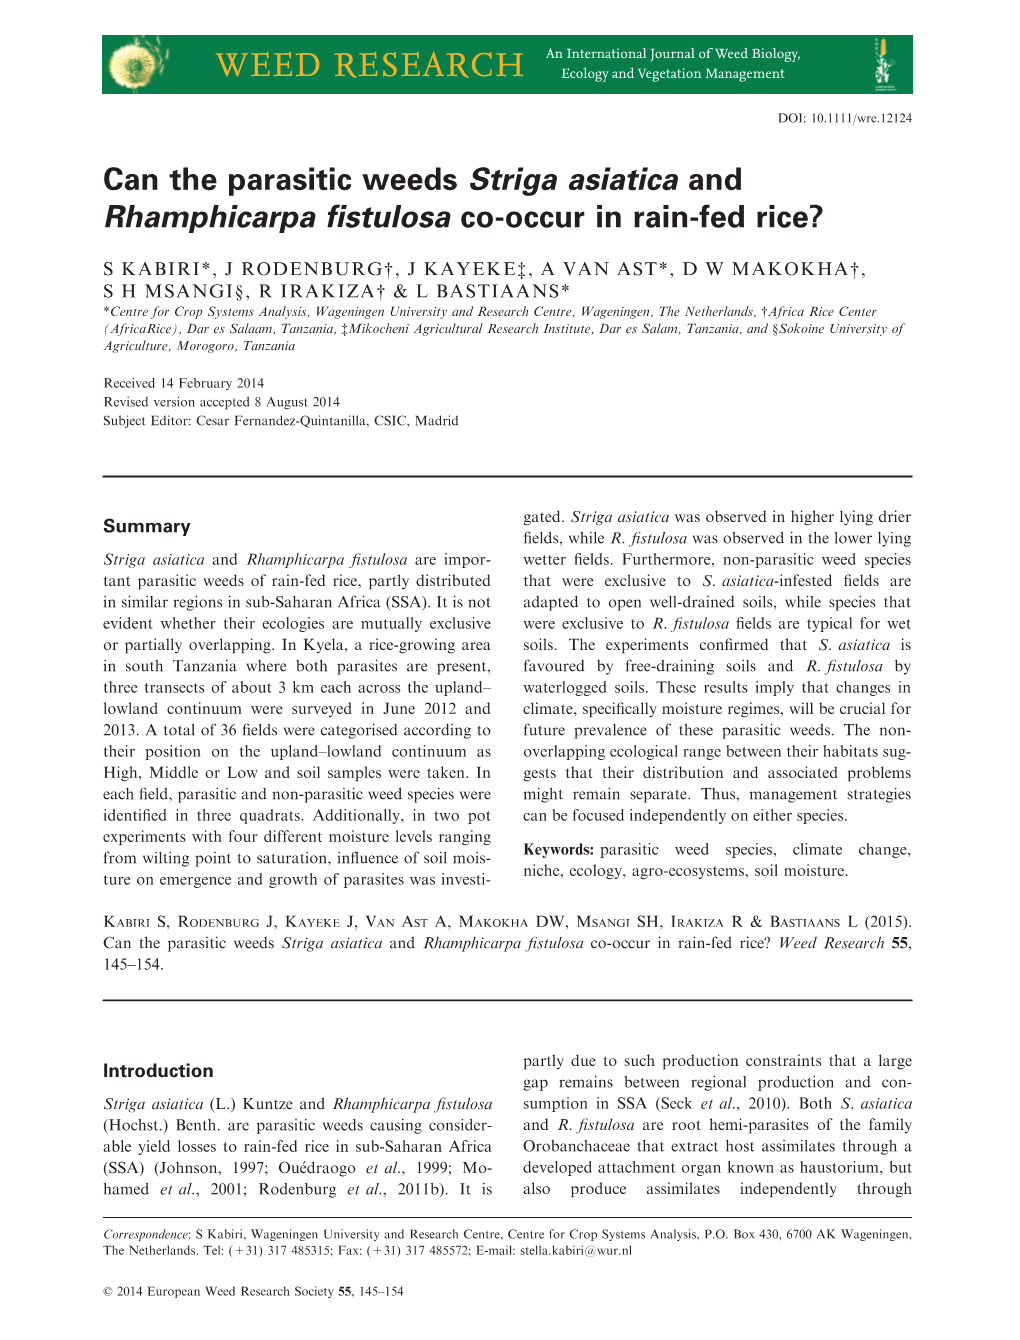 Can the Parasitic Weeds Striga Asiatica and Rhamphicarpa ﬁstulosa Co-Occur in Rain-Fed Rice?